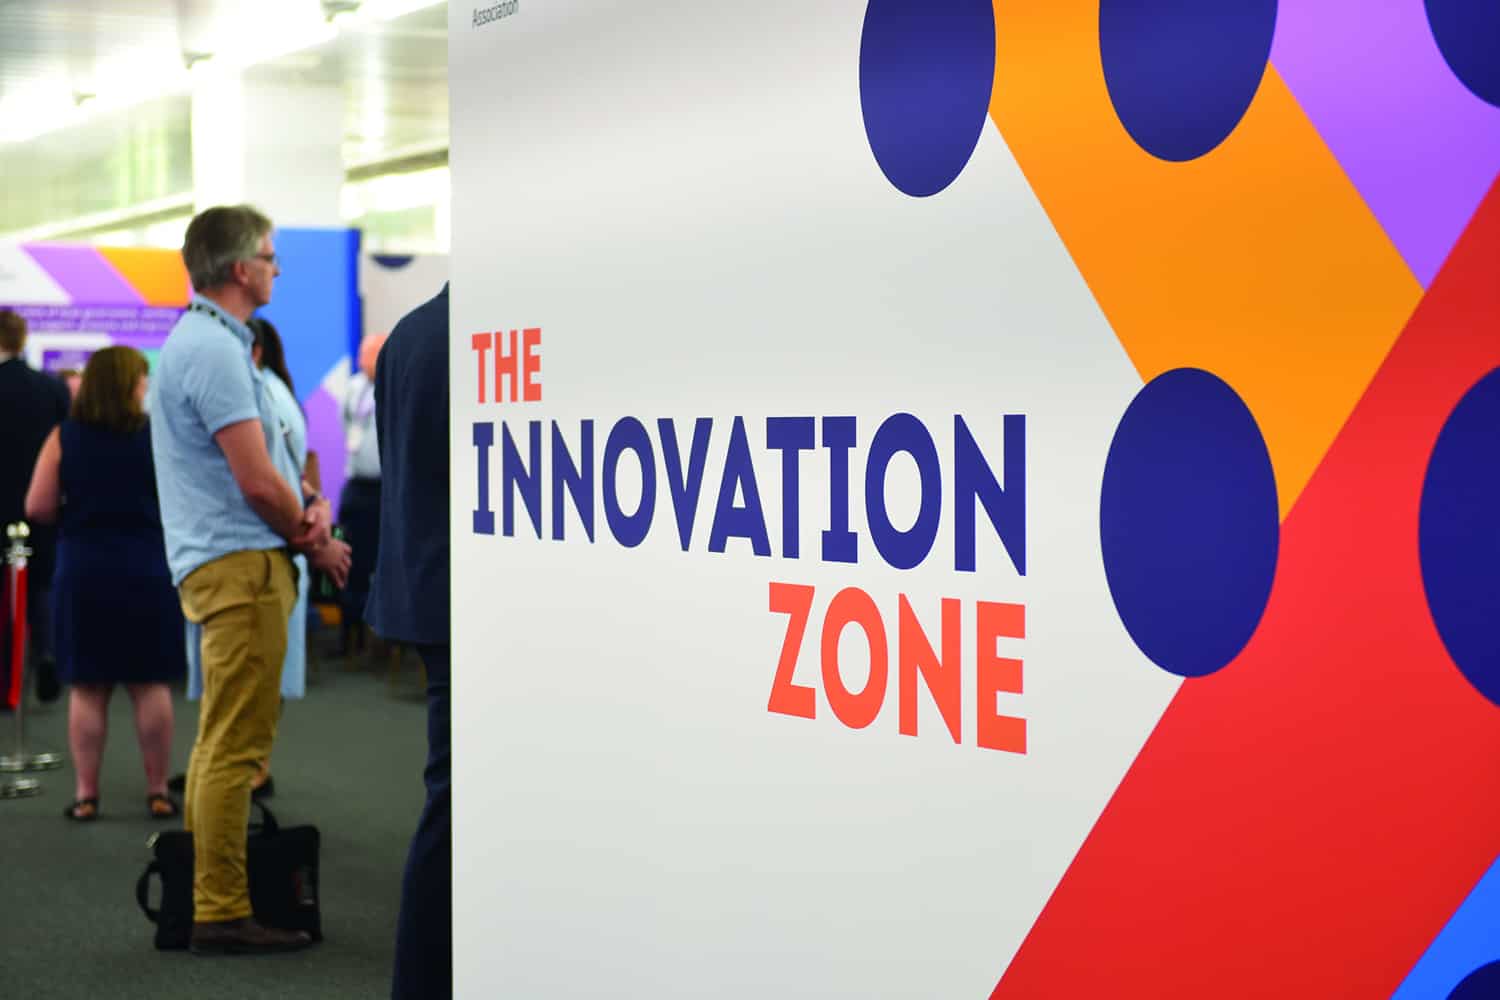 poster saying ‘The Innovation Zone’ at the LGA’s annual conference 2022,